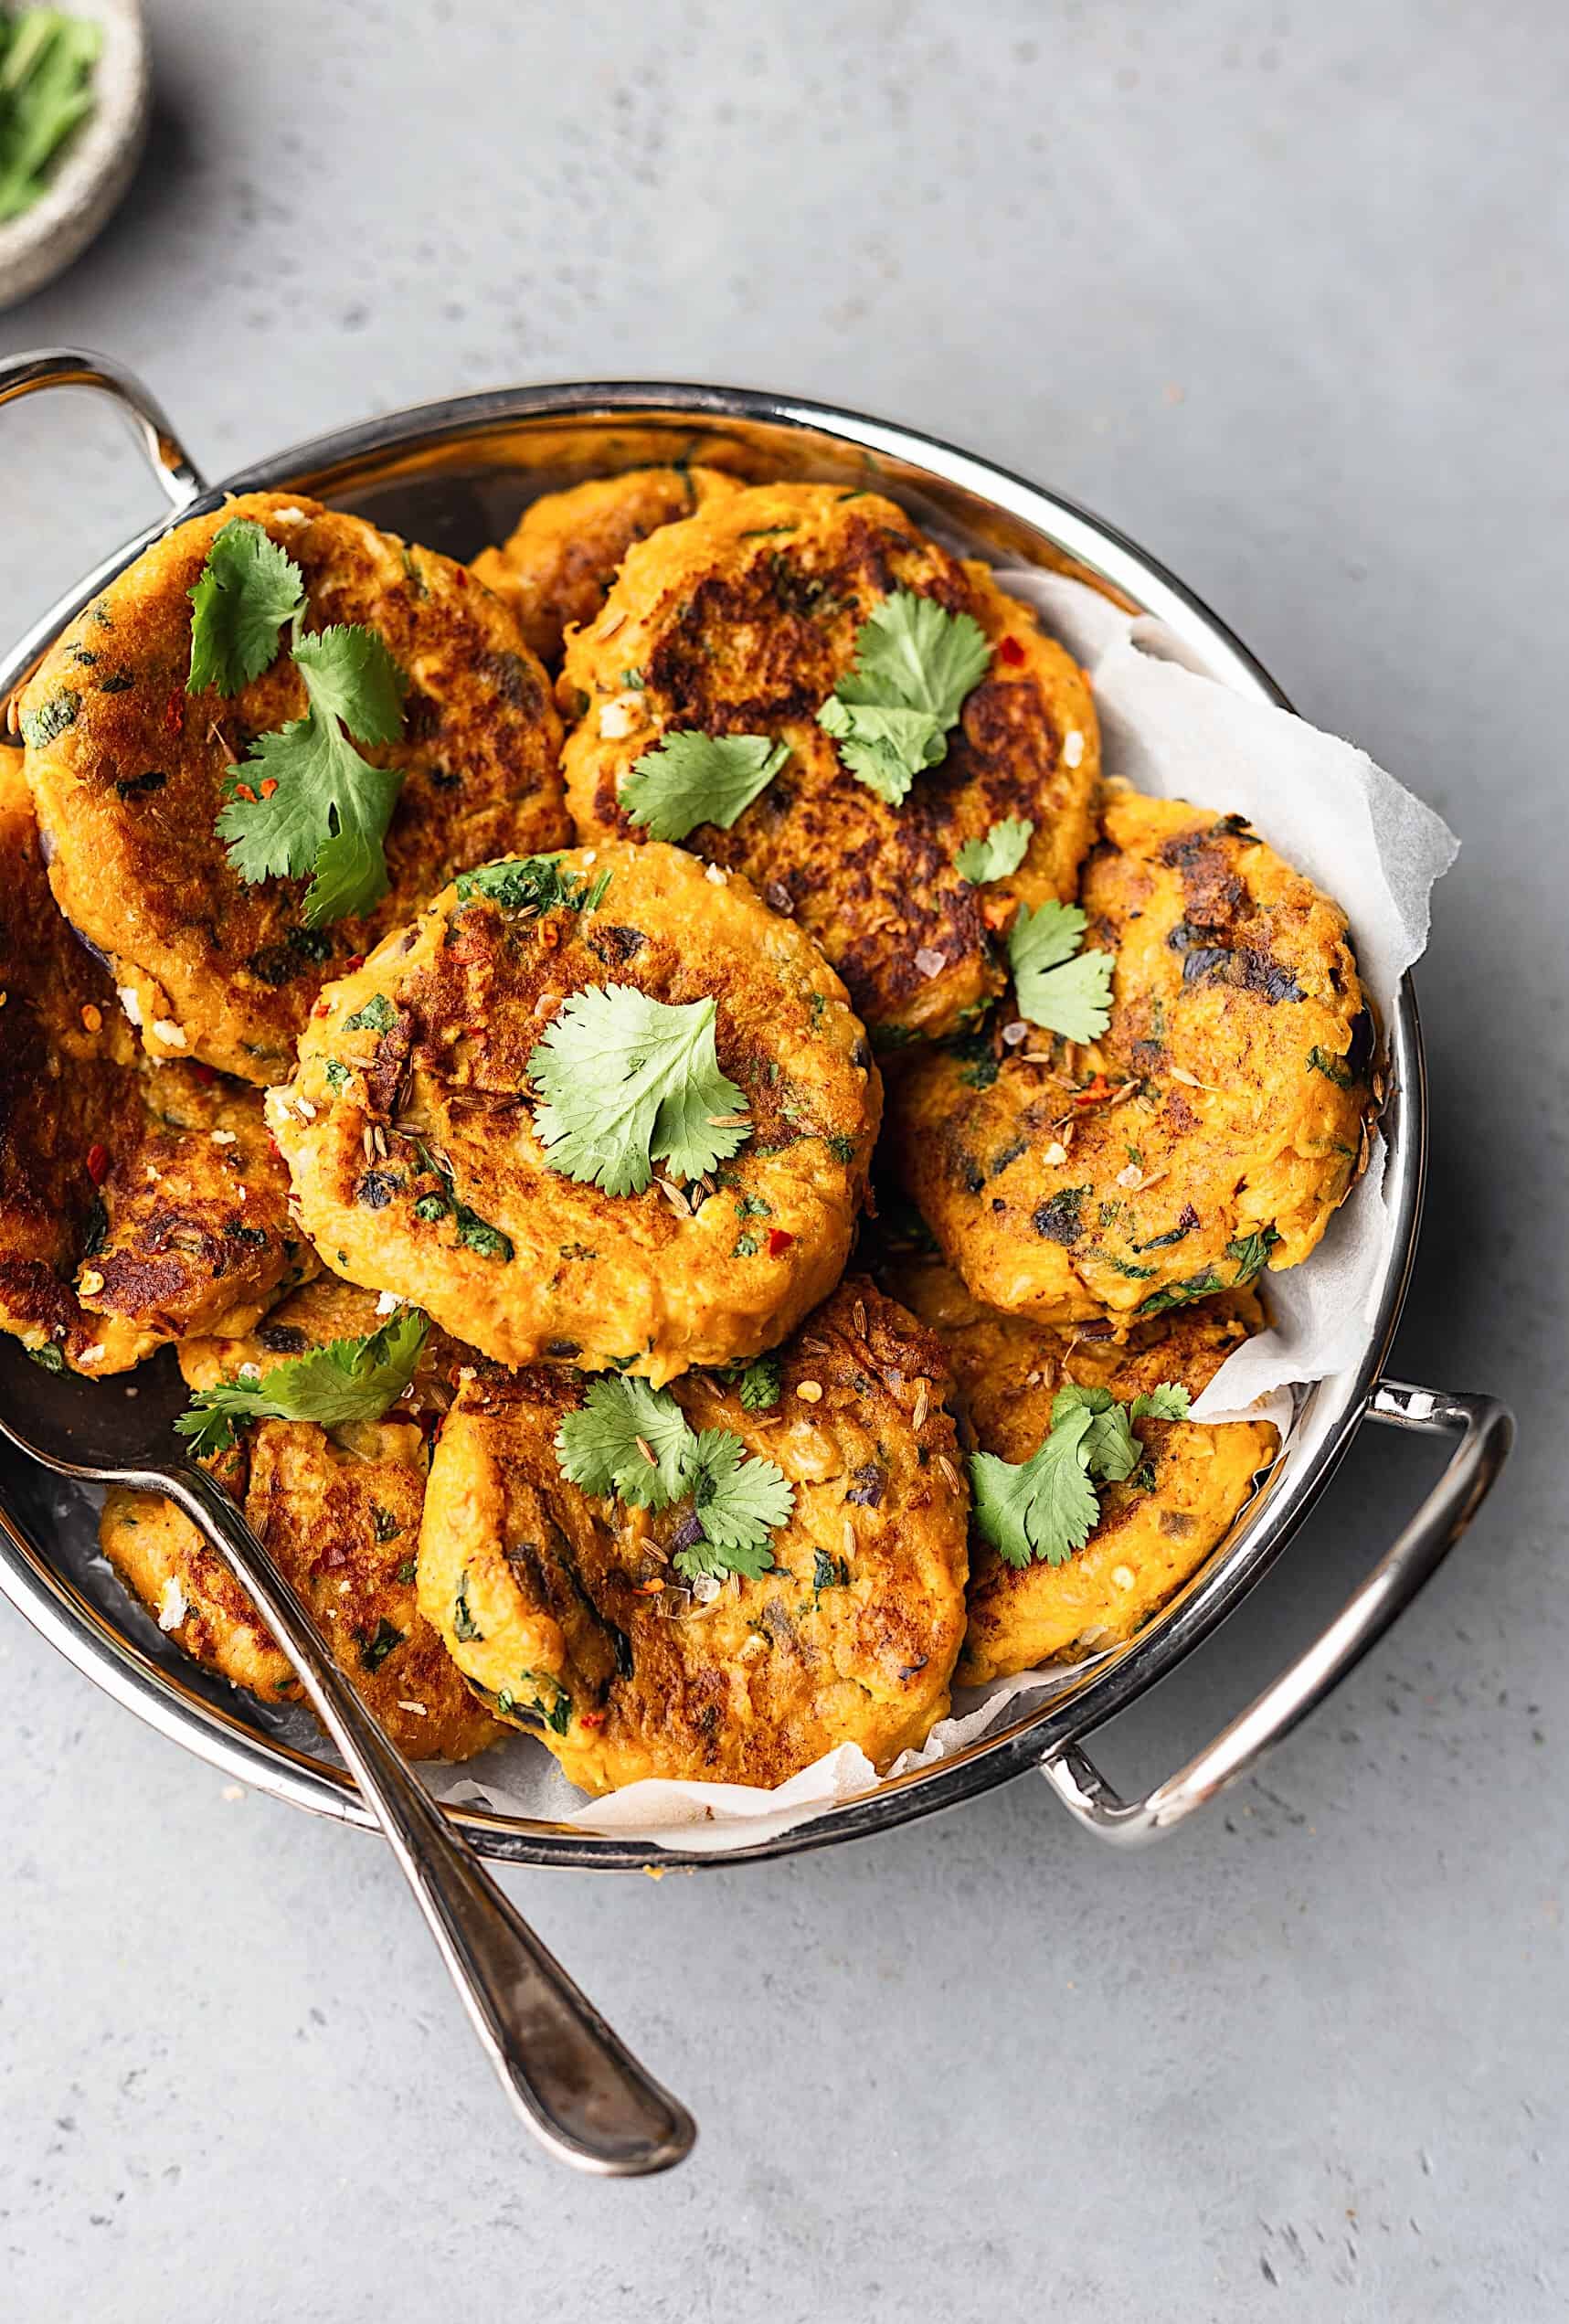 Vegan Curried Sweet Potato and Chickpea Patties #recipe #vegan #food #sweetpotato #chickpea